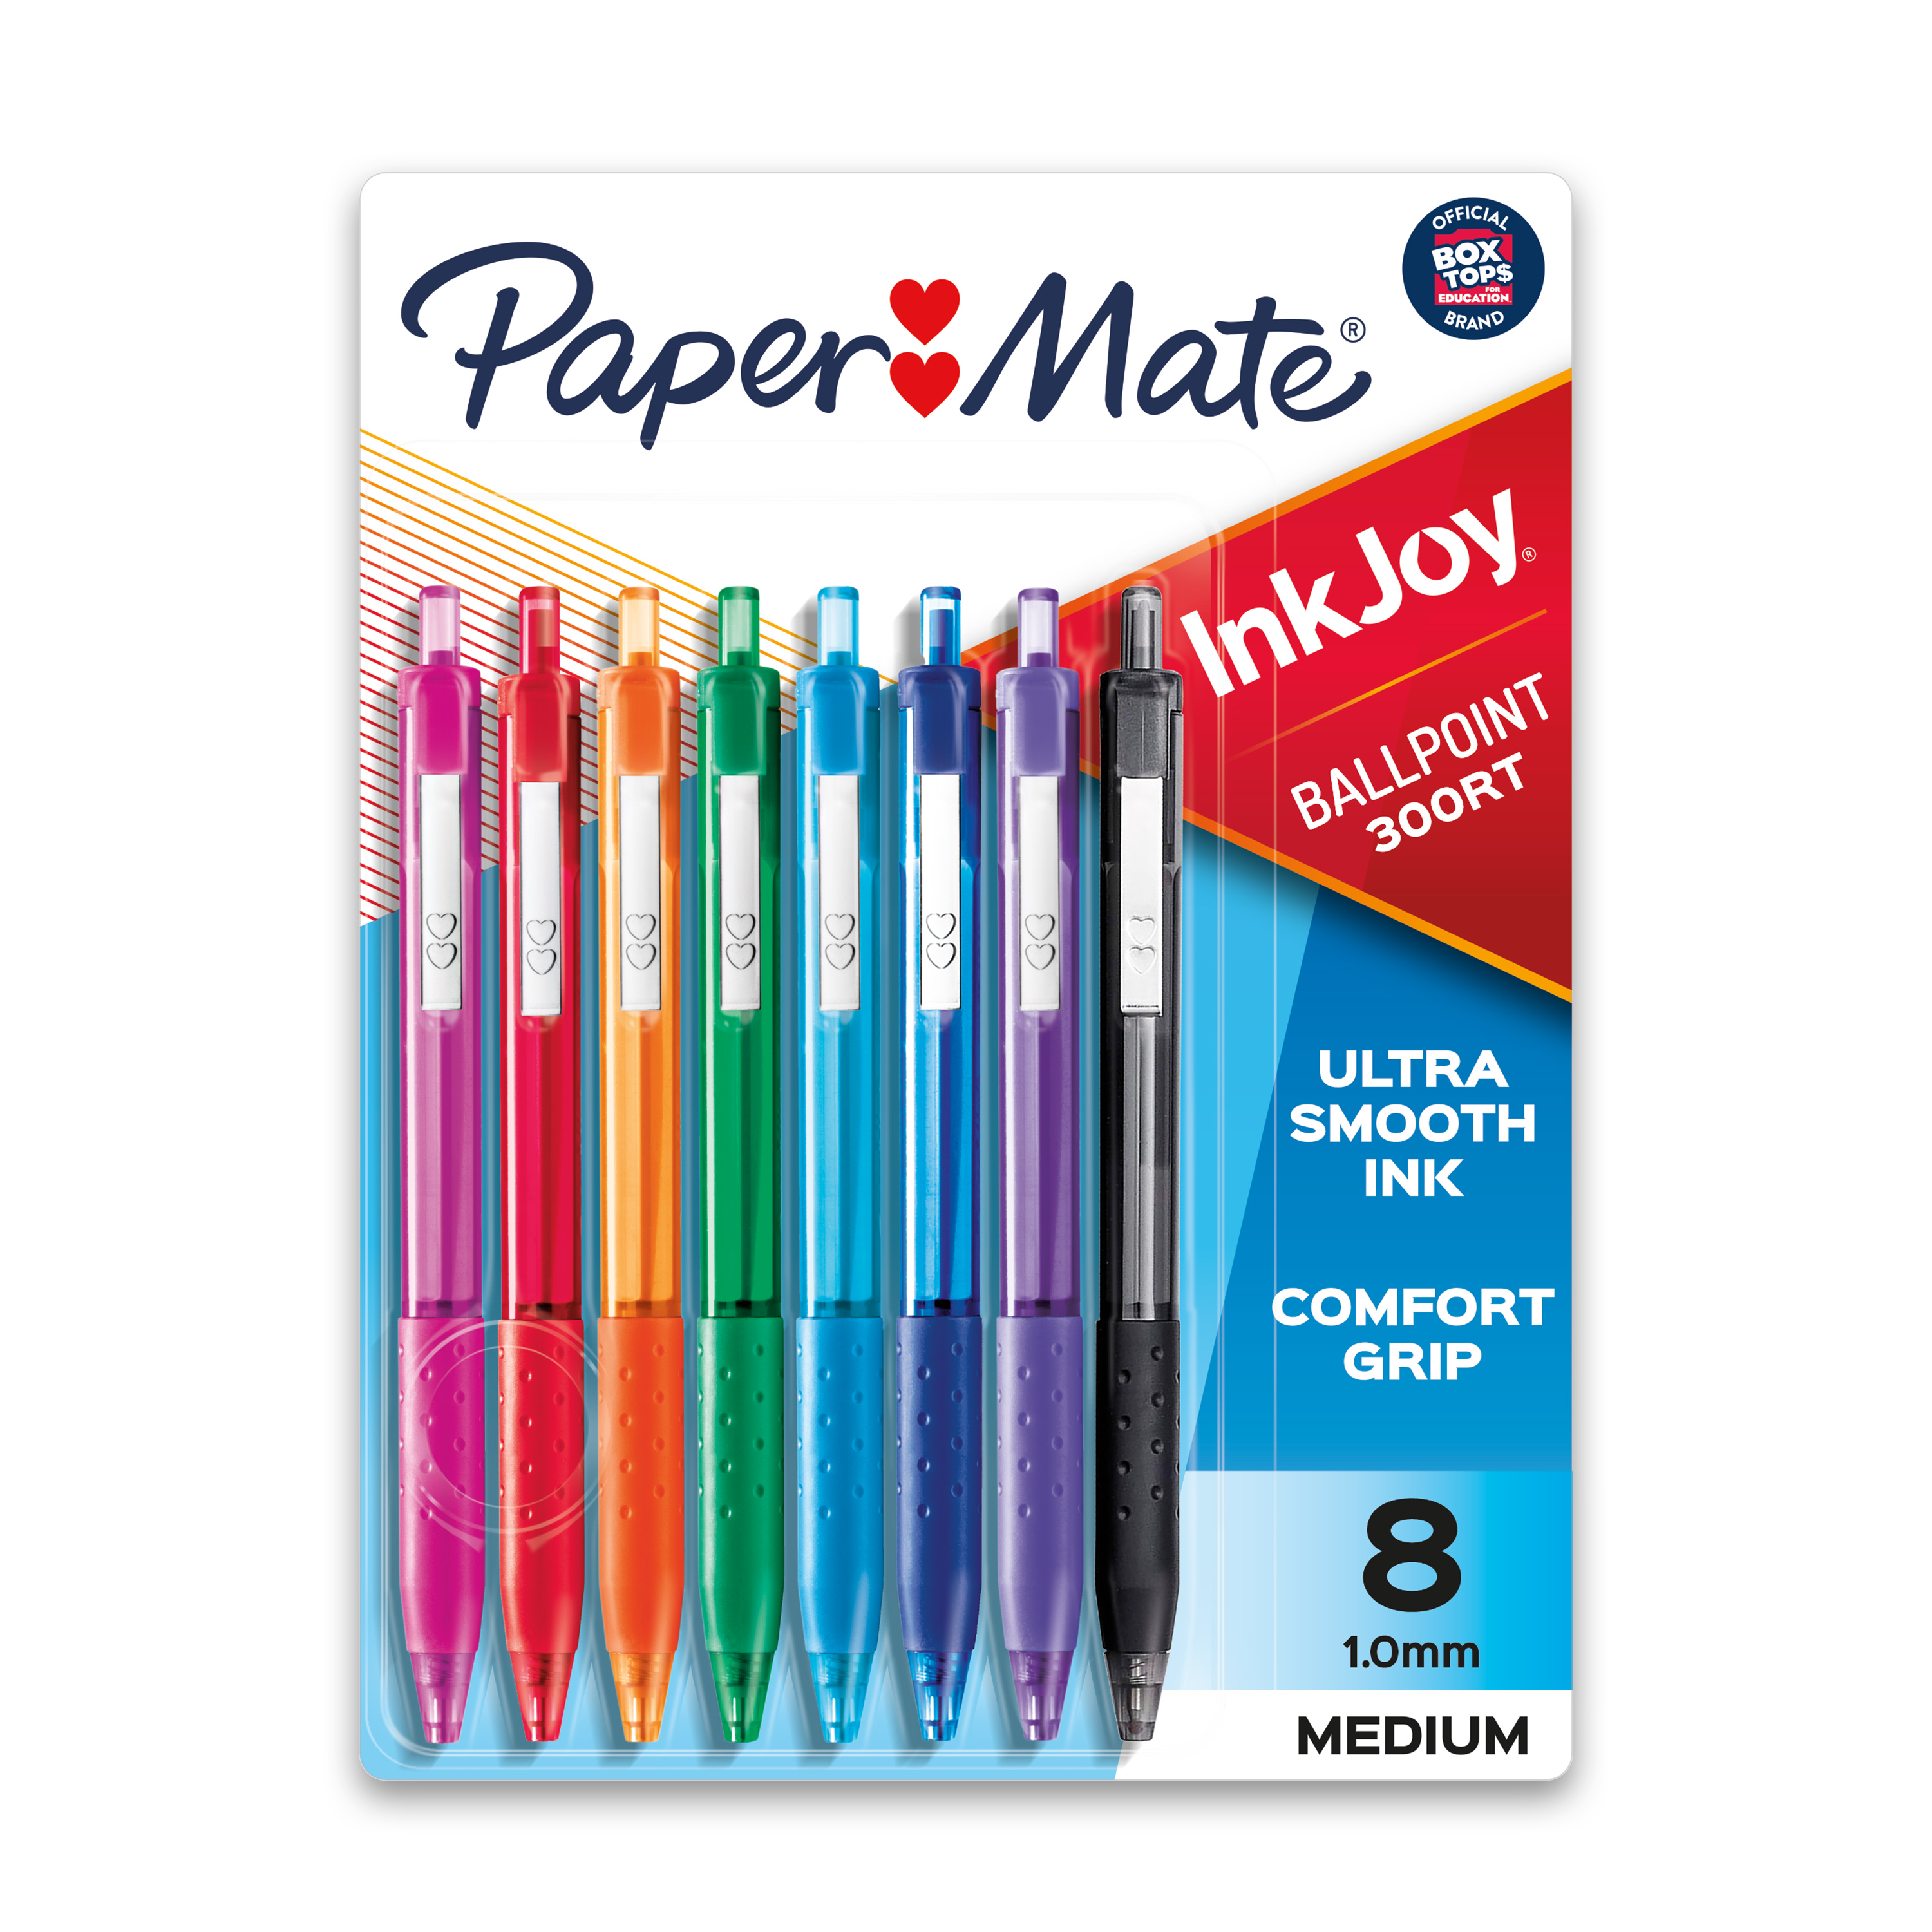 Paper Mate InkJoy Retractable Ballpoint Pen, 1.0 mm, Assorted Colors, 8 Count - image 1 of 8